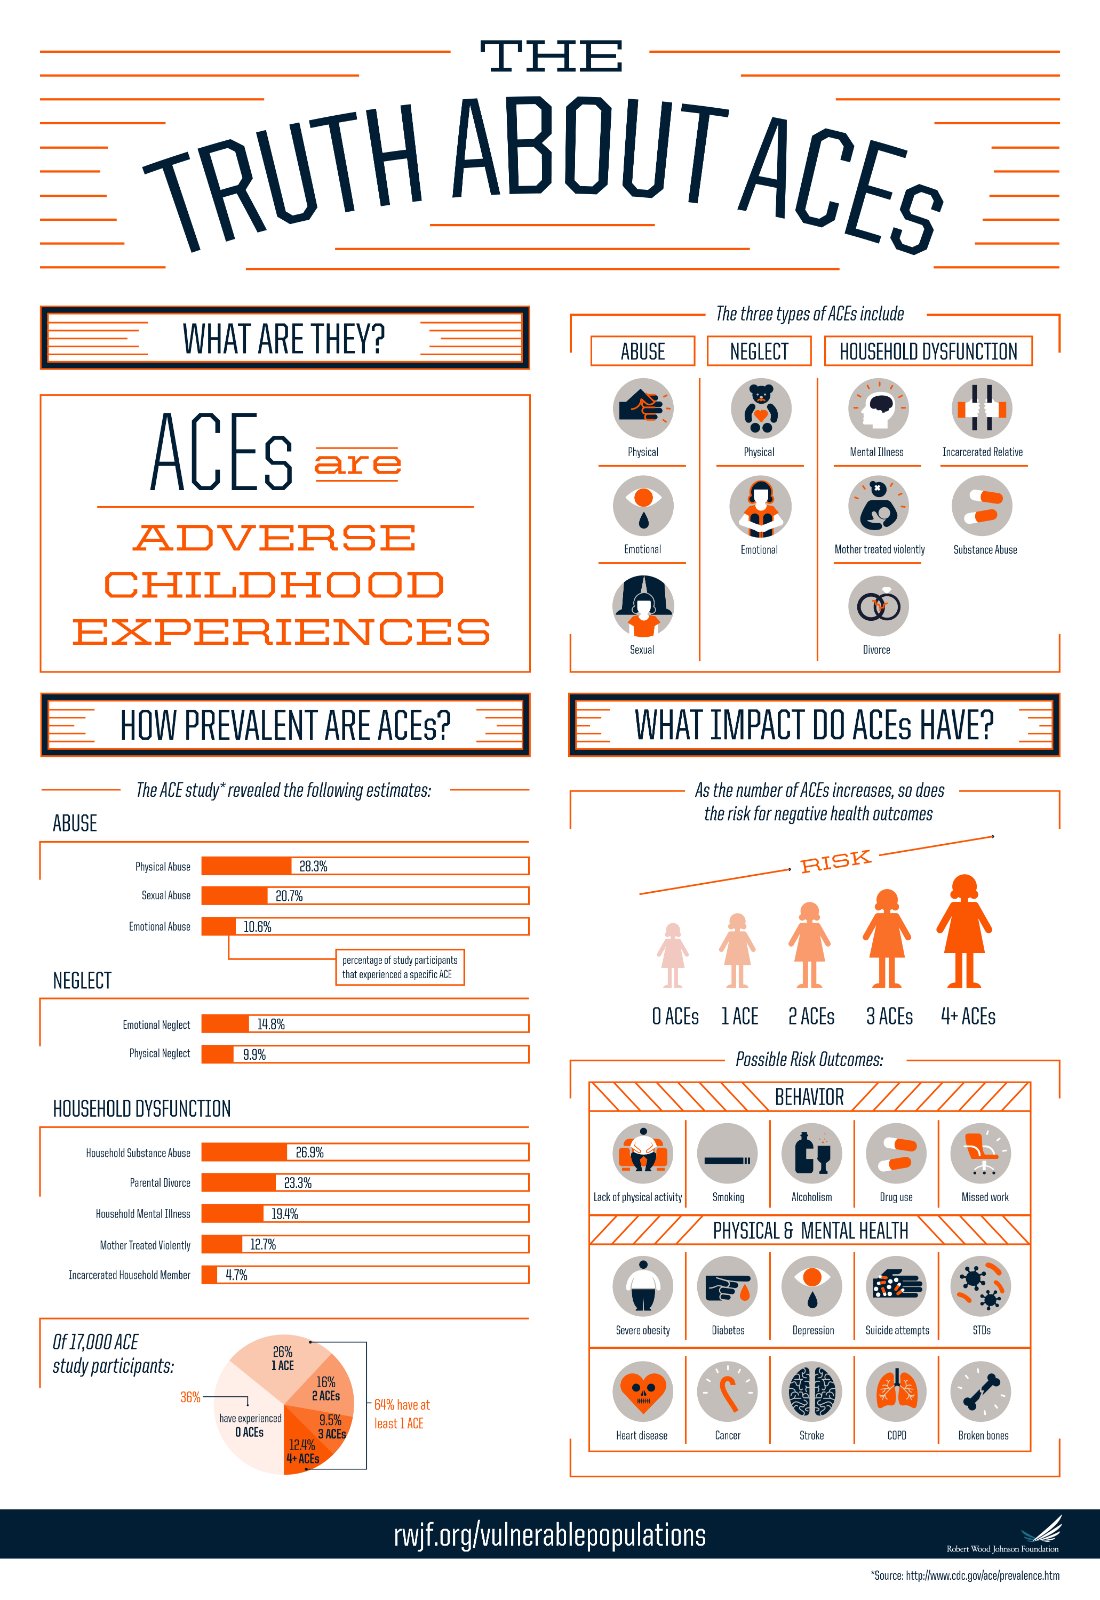 Adverse Childhood Experiences Chart